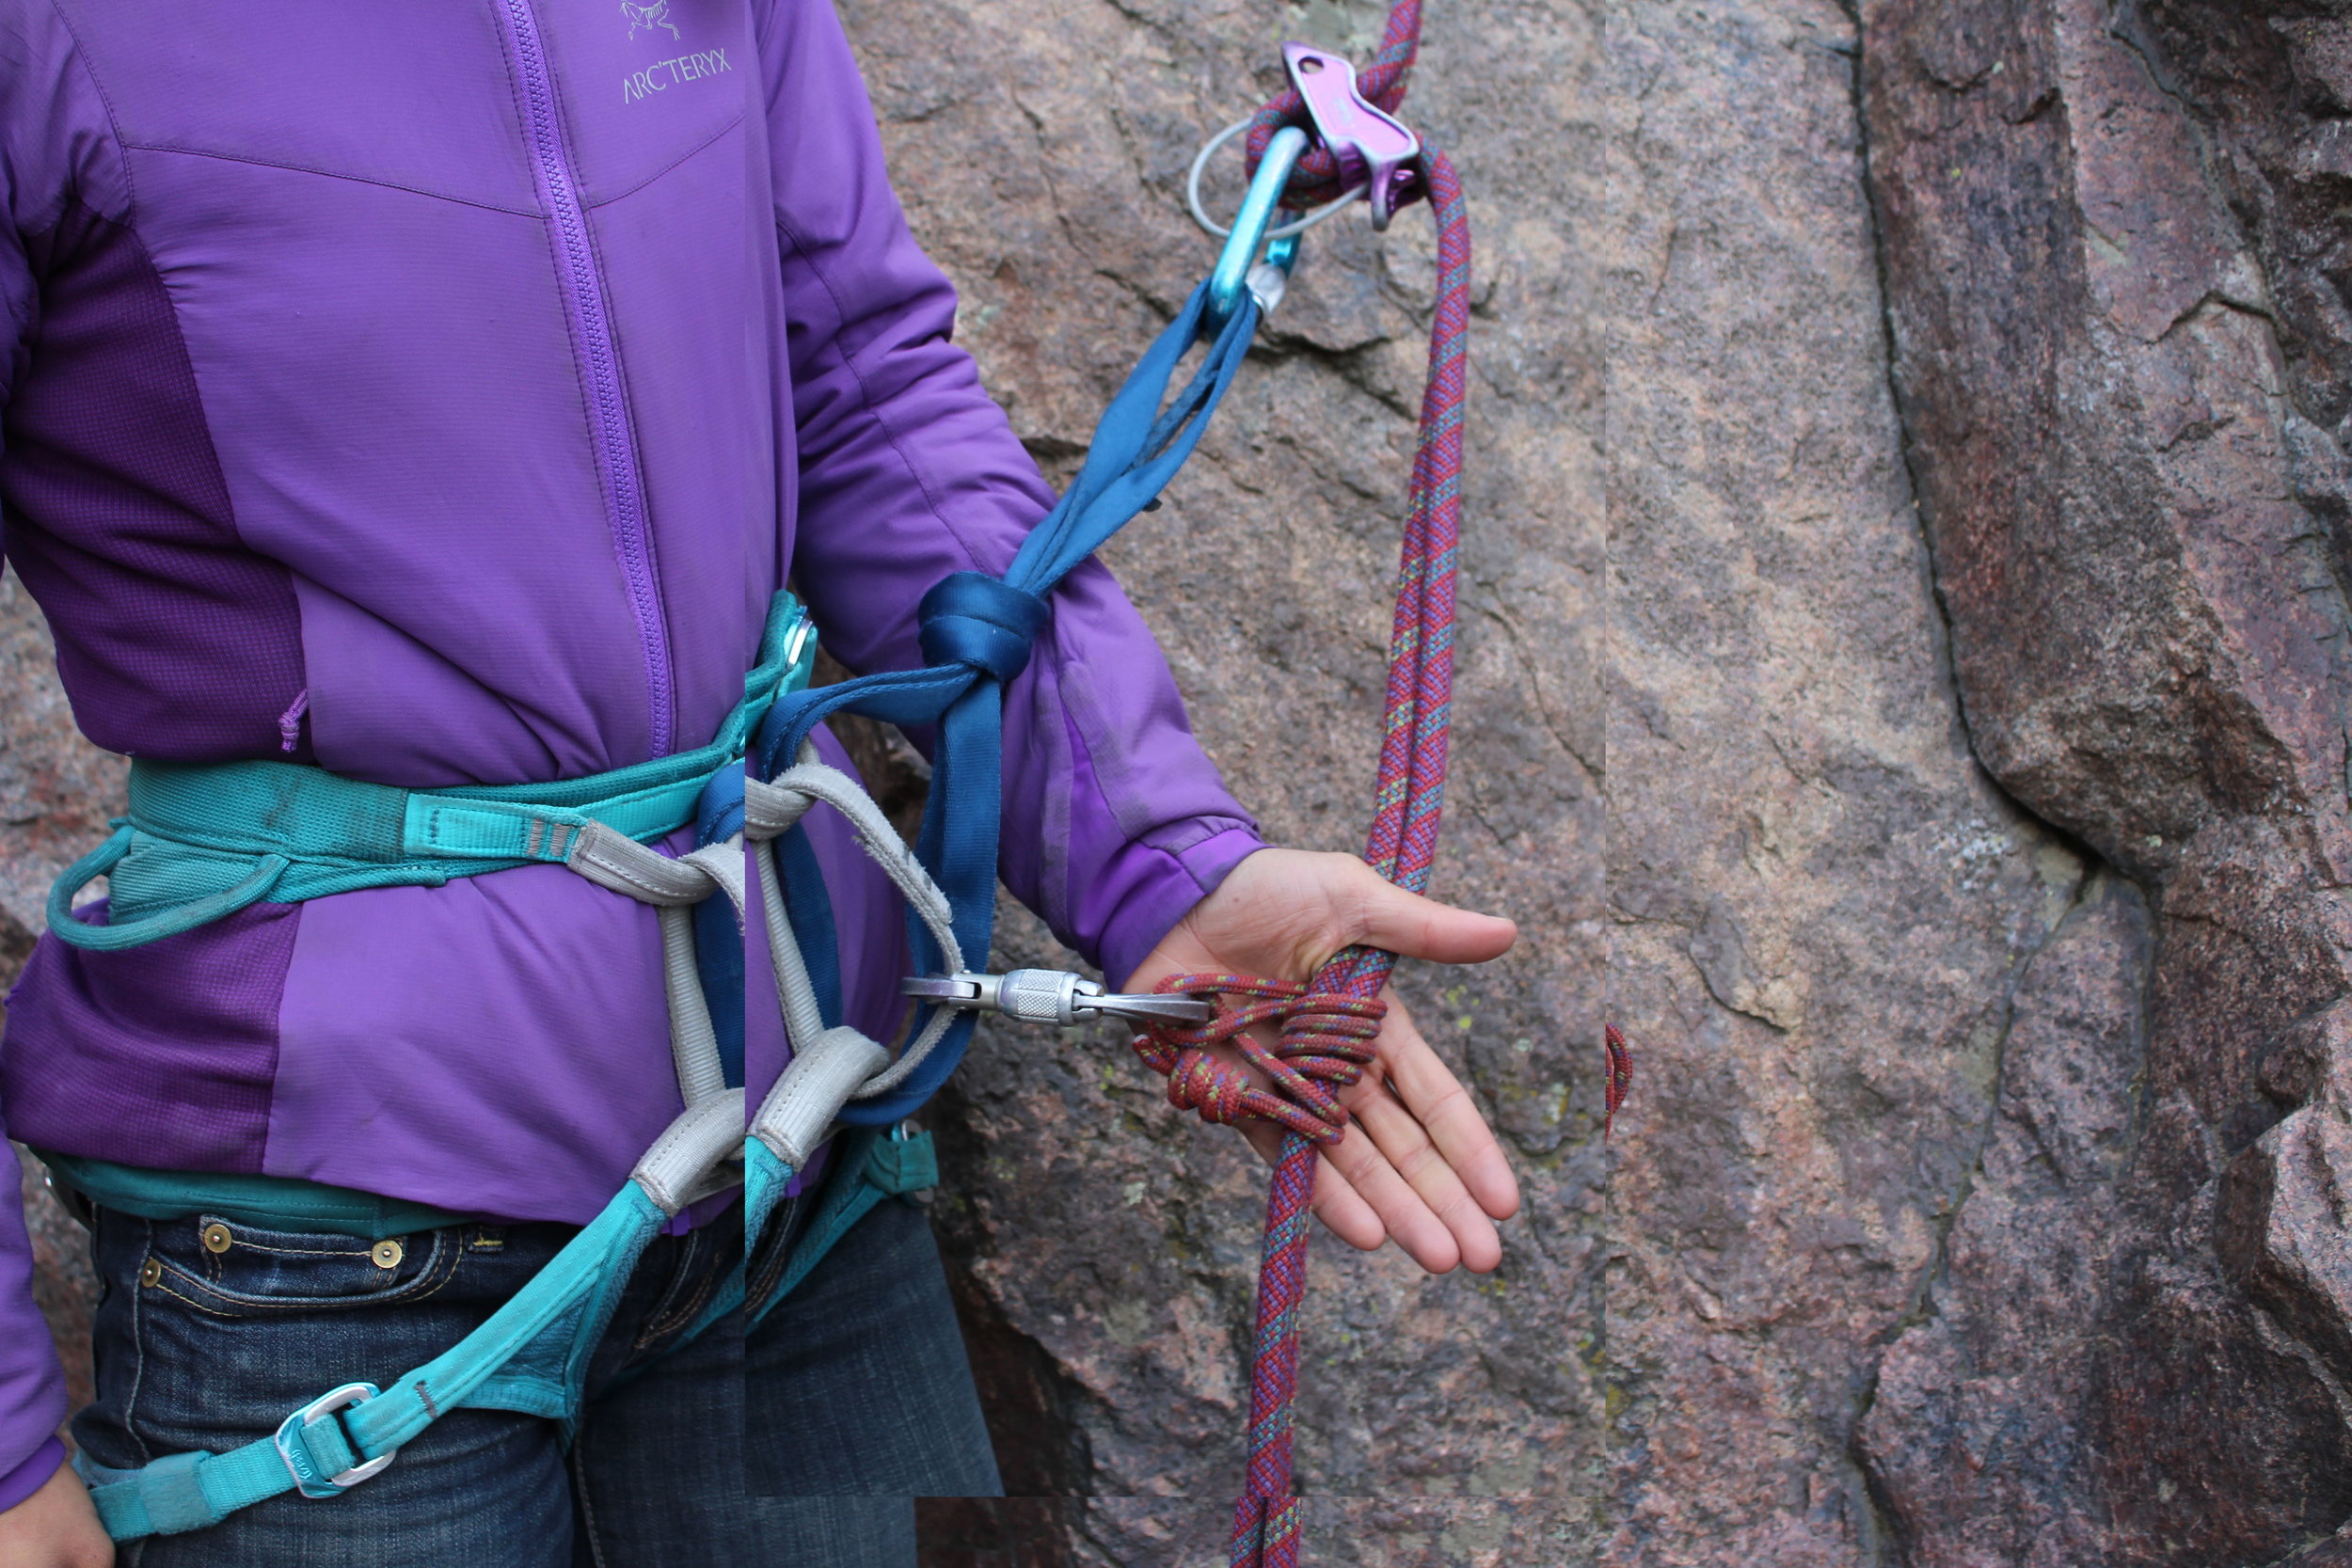 ...and the autoblock is completed by rejoining the nylon loop with the locking carabiner.